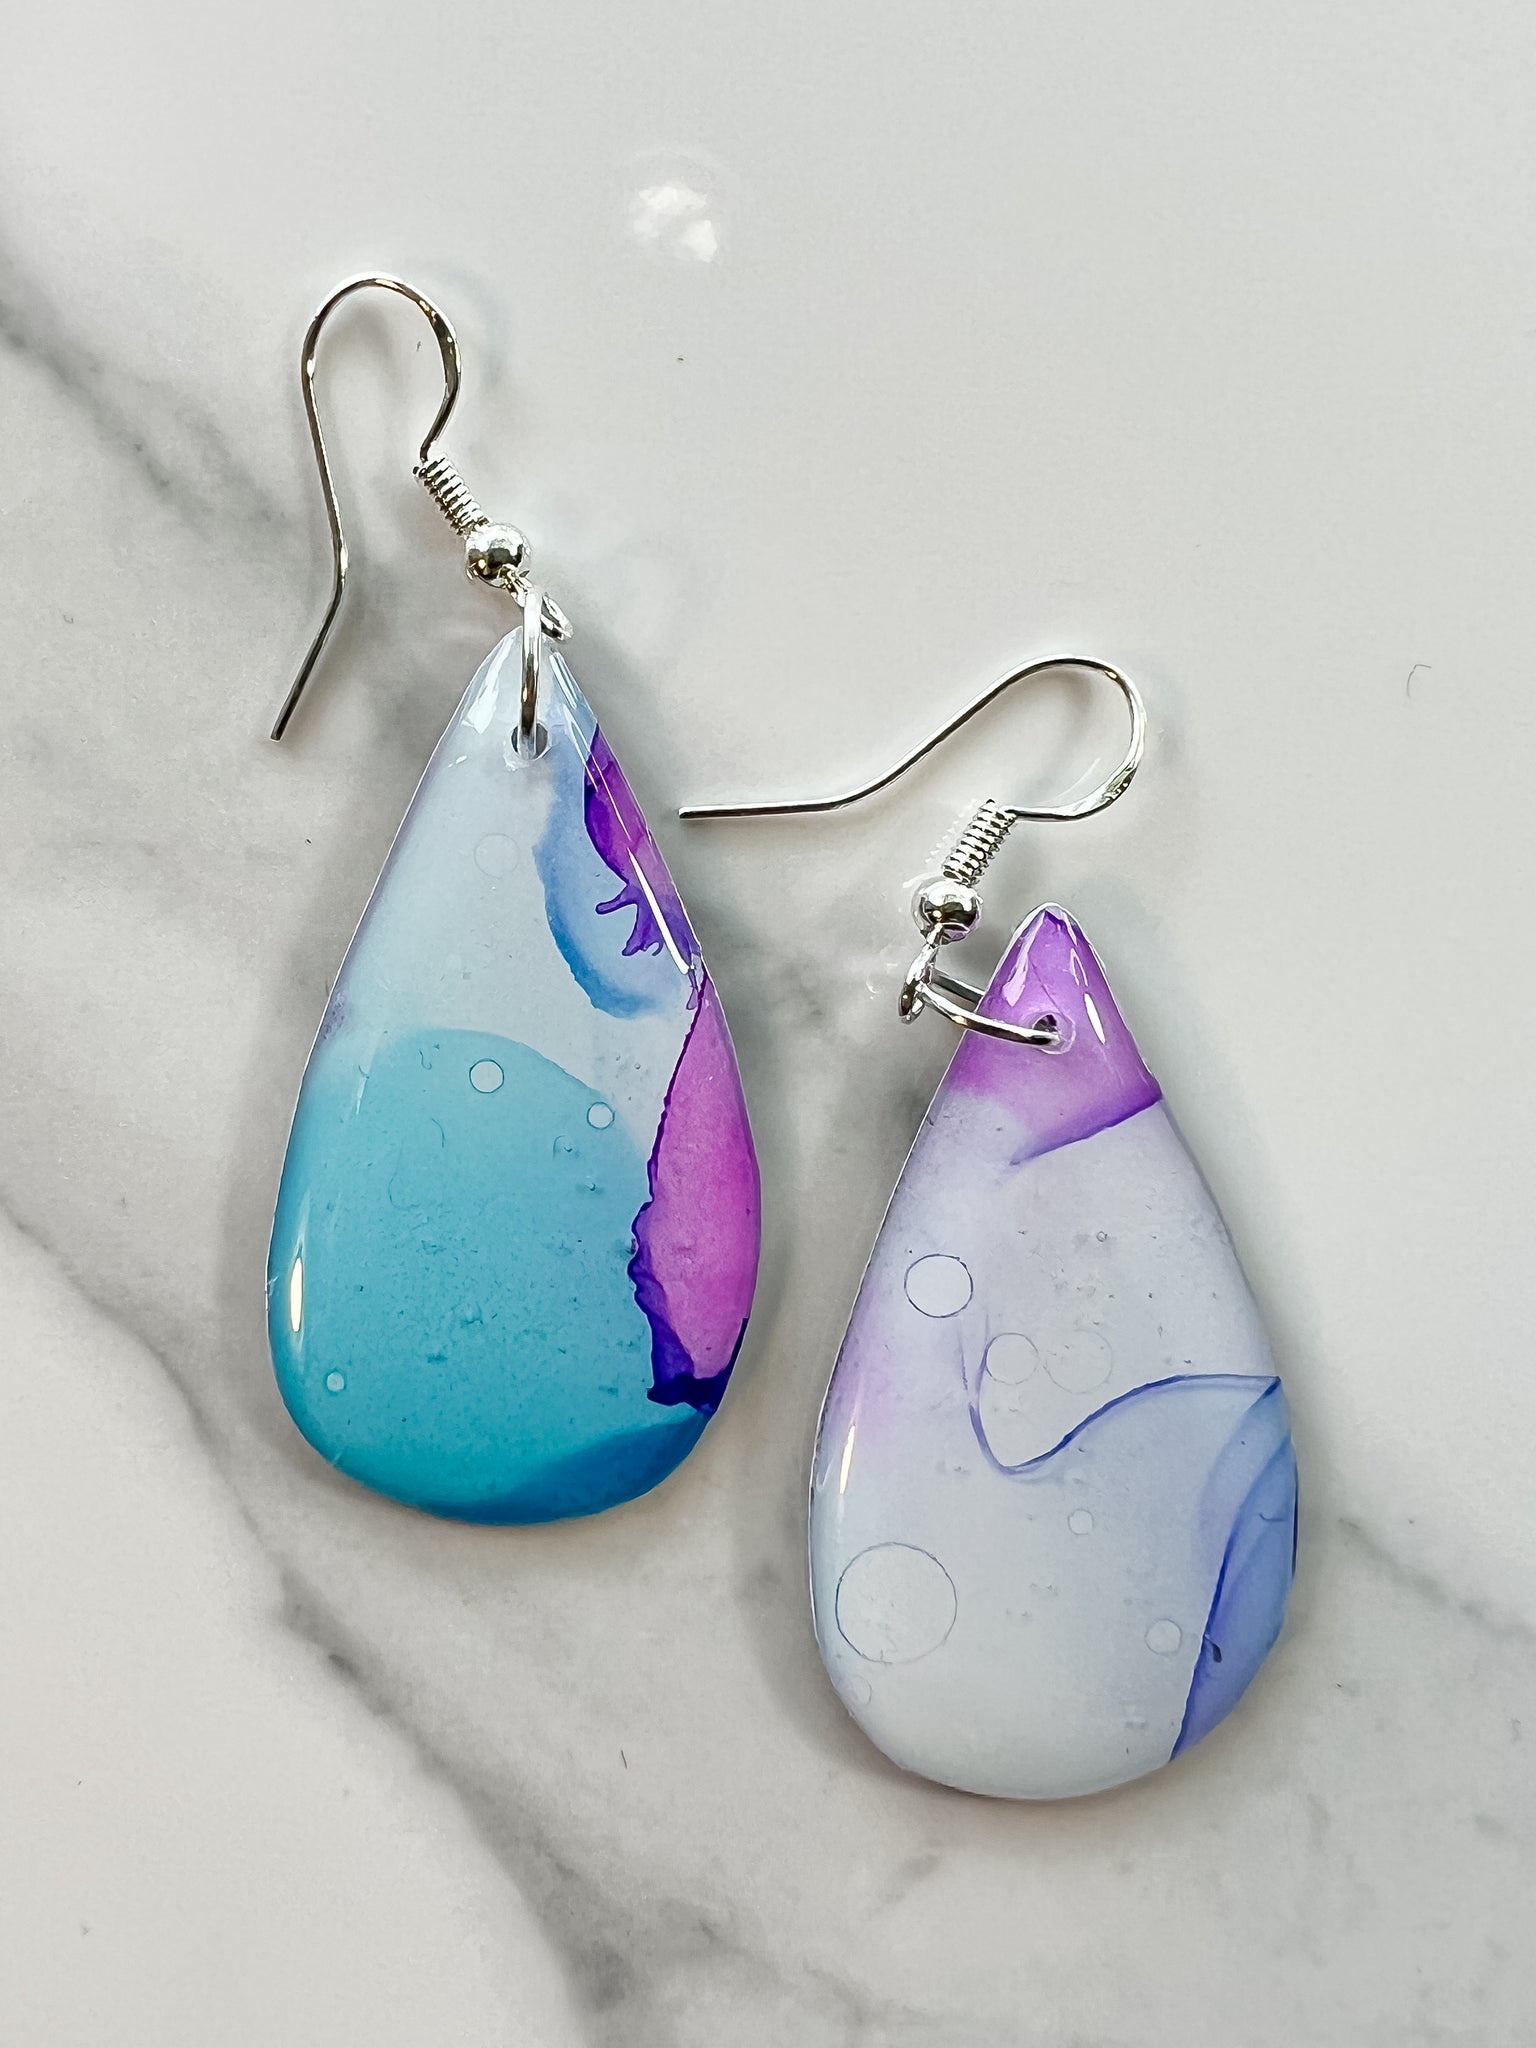 Sunset & Twilight Collection: Alcohol Ink Earrings